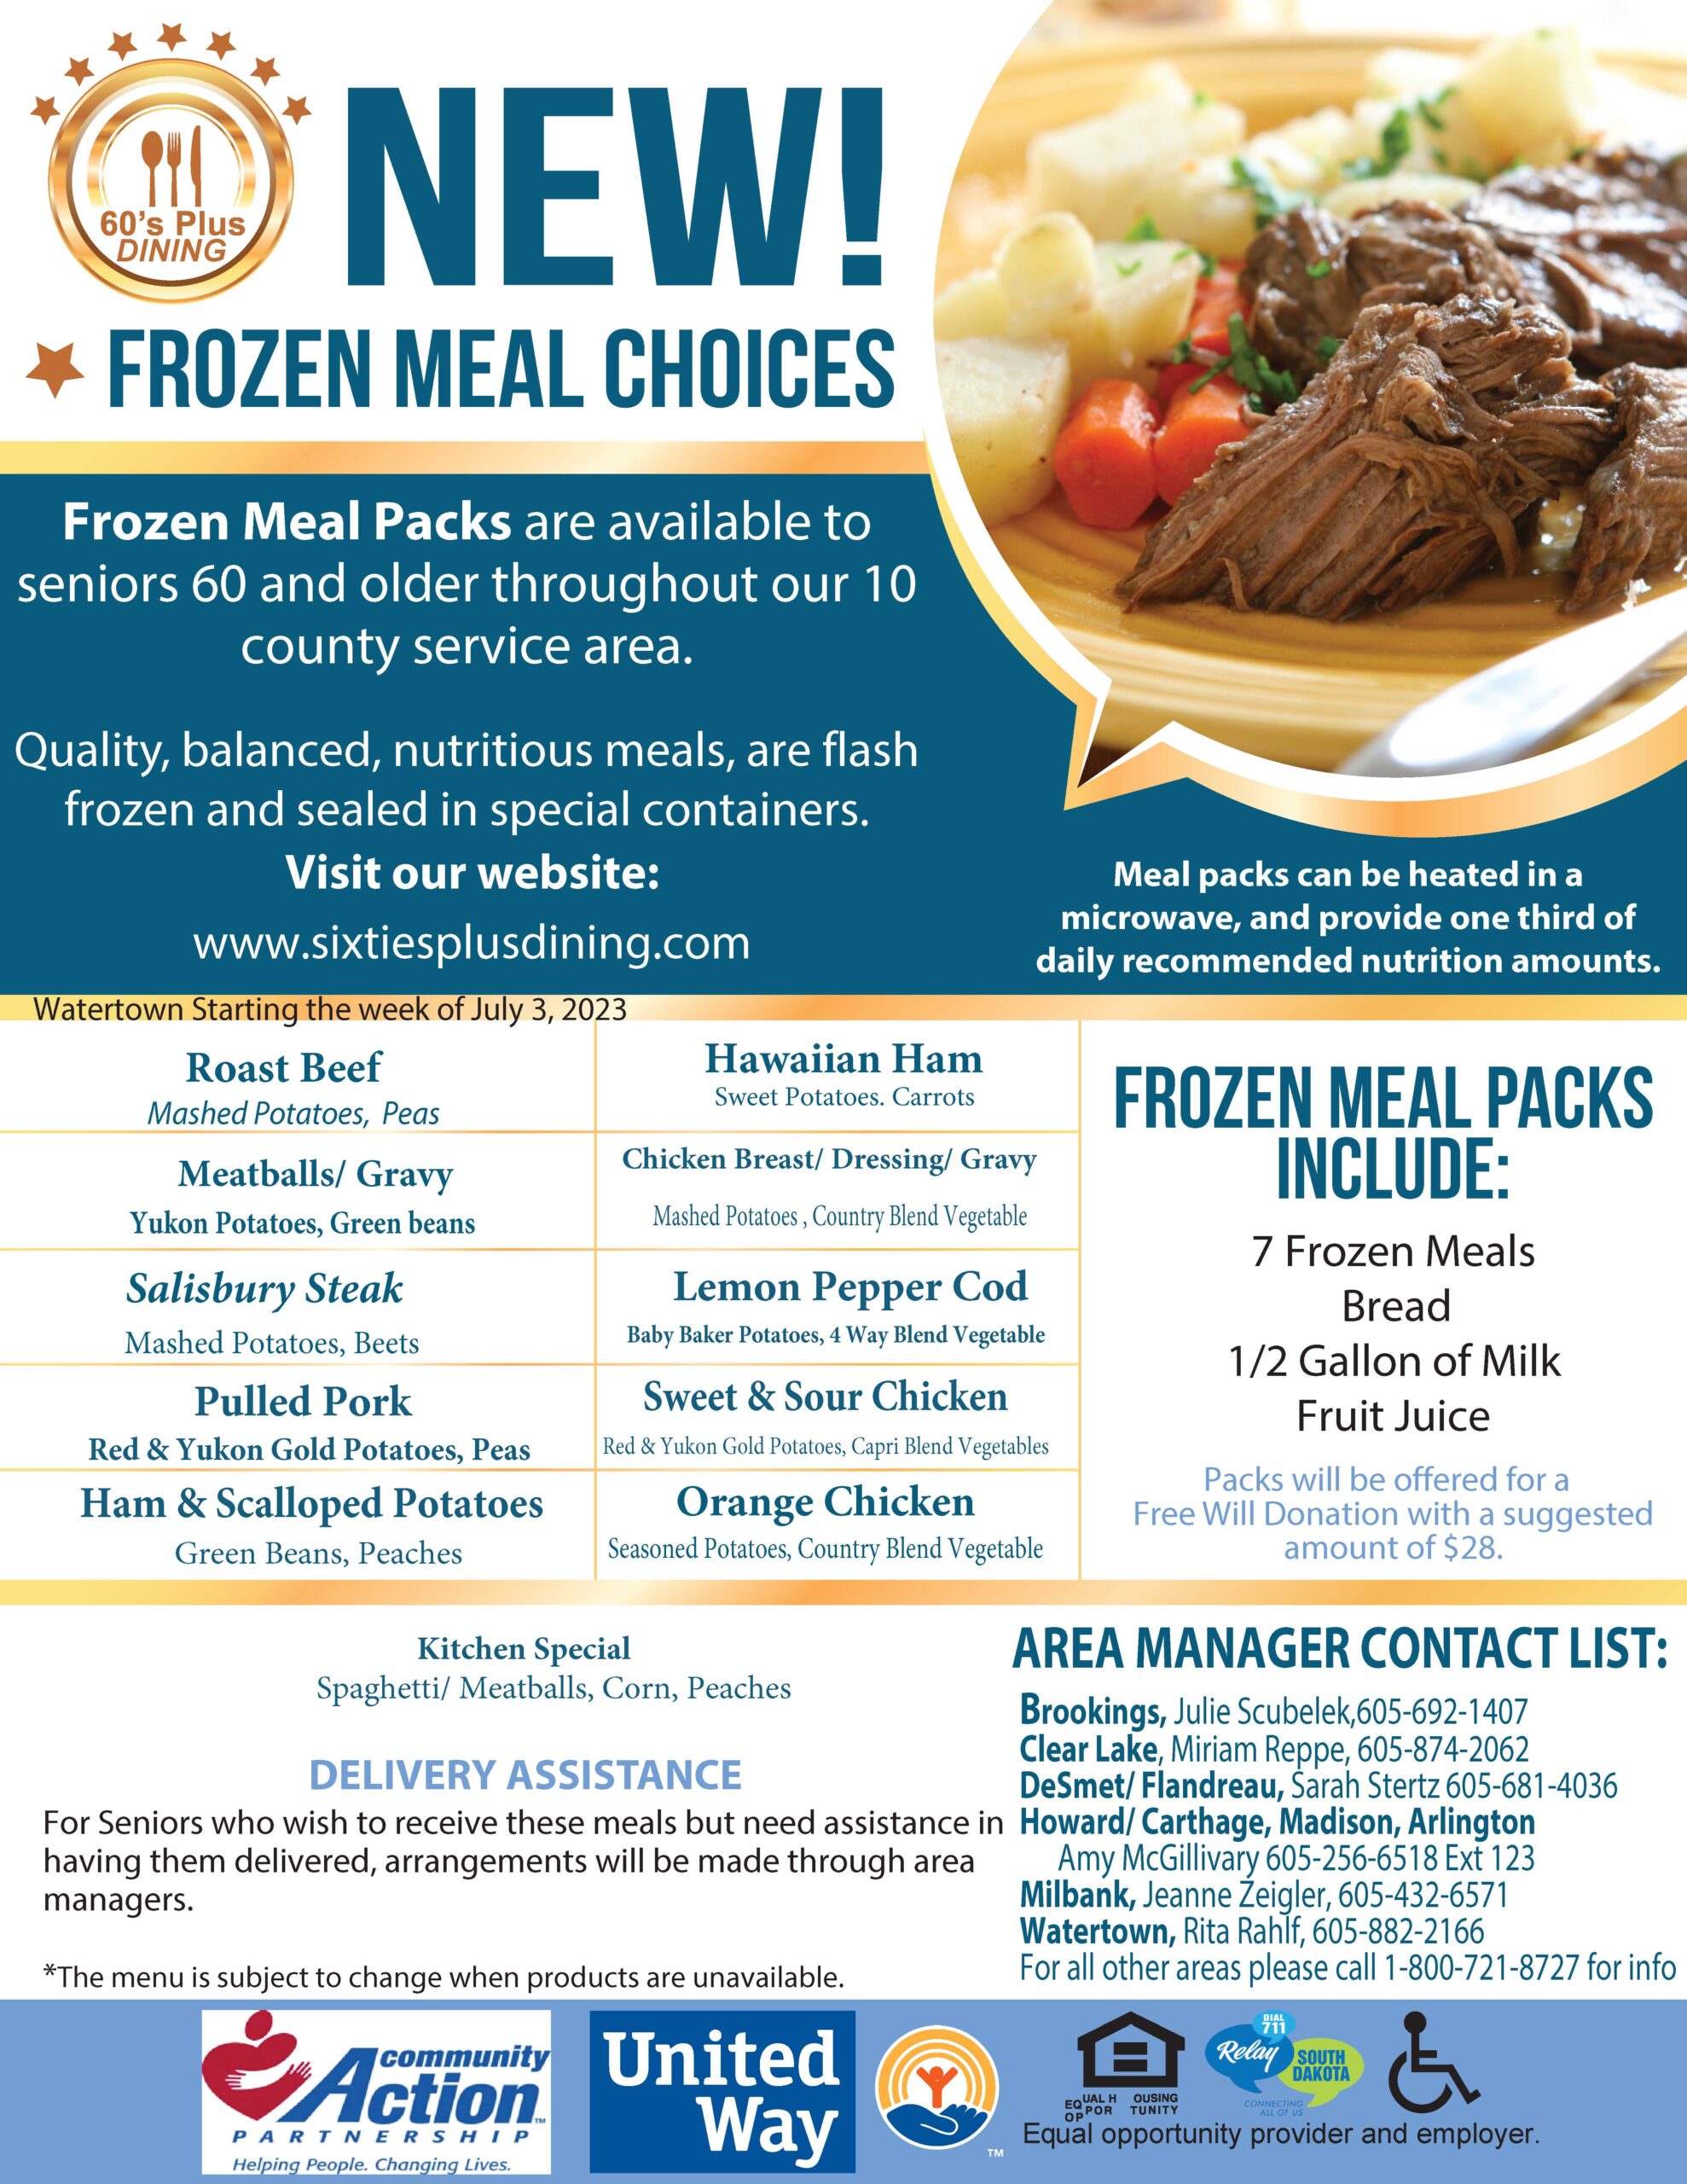 Watertown Frozen Meal Choices -July 2023